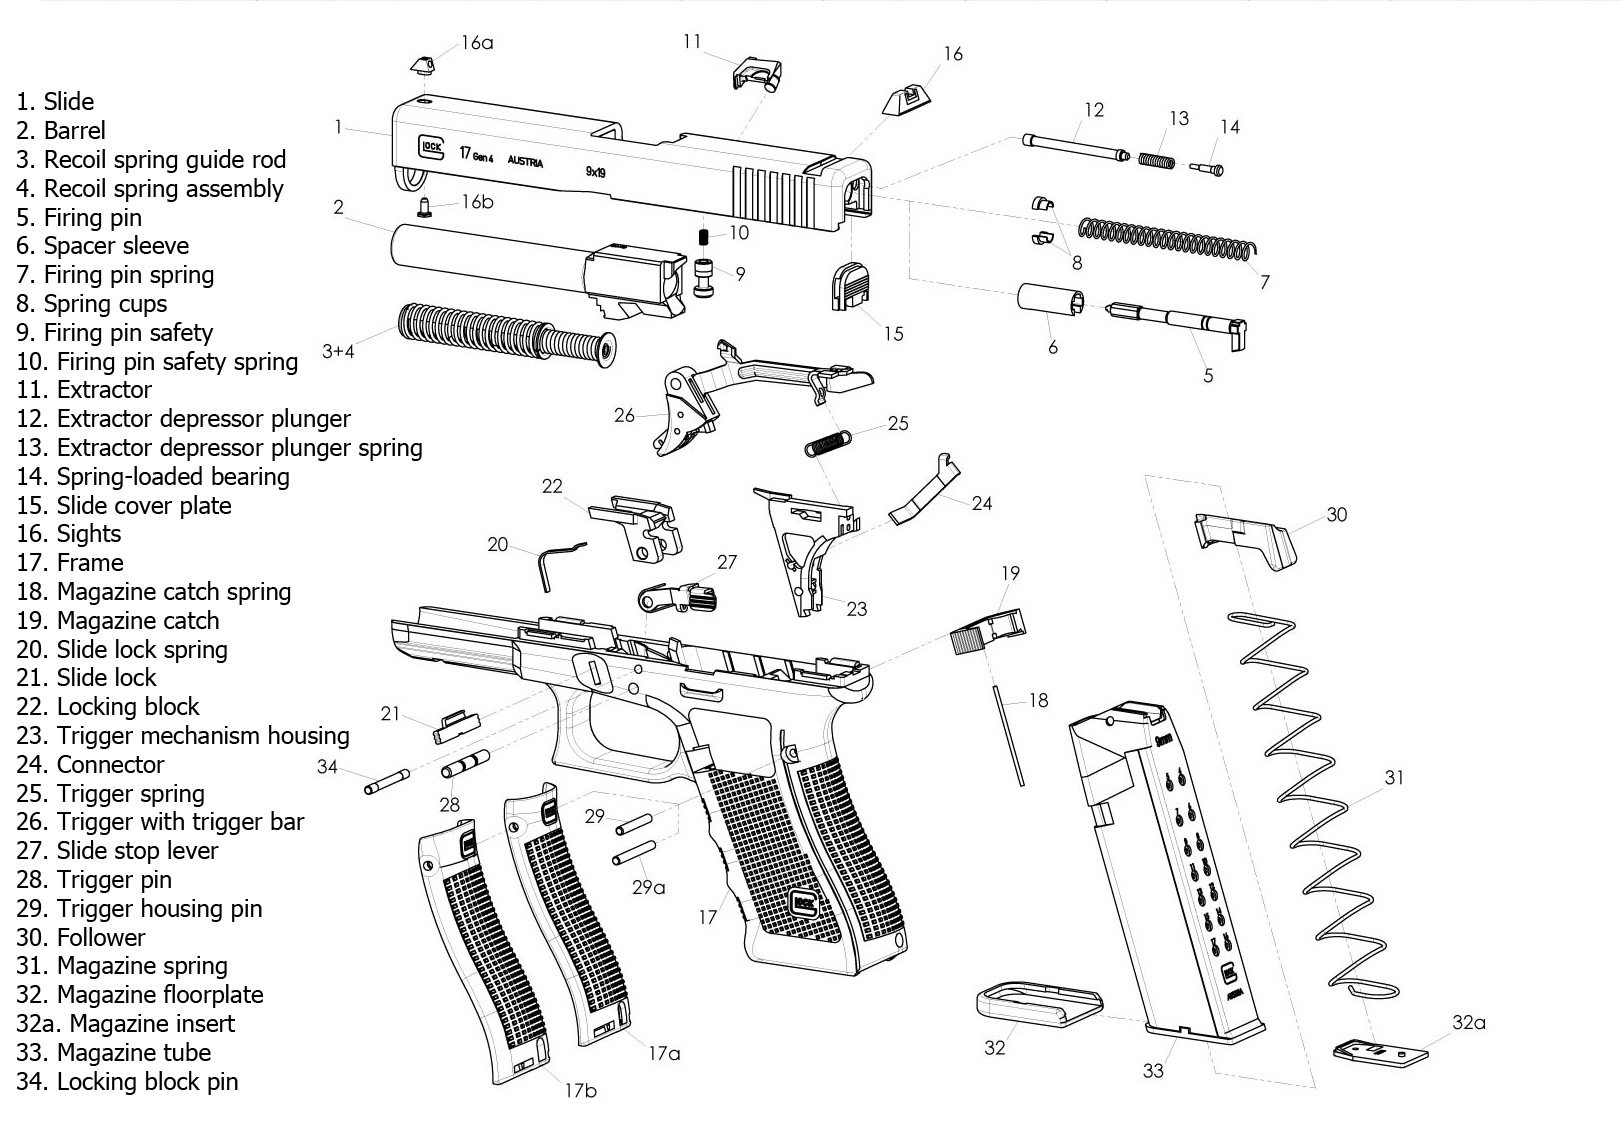 Glock 17 Gen 4 Exploded-View